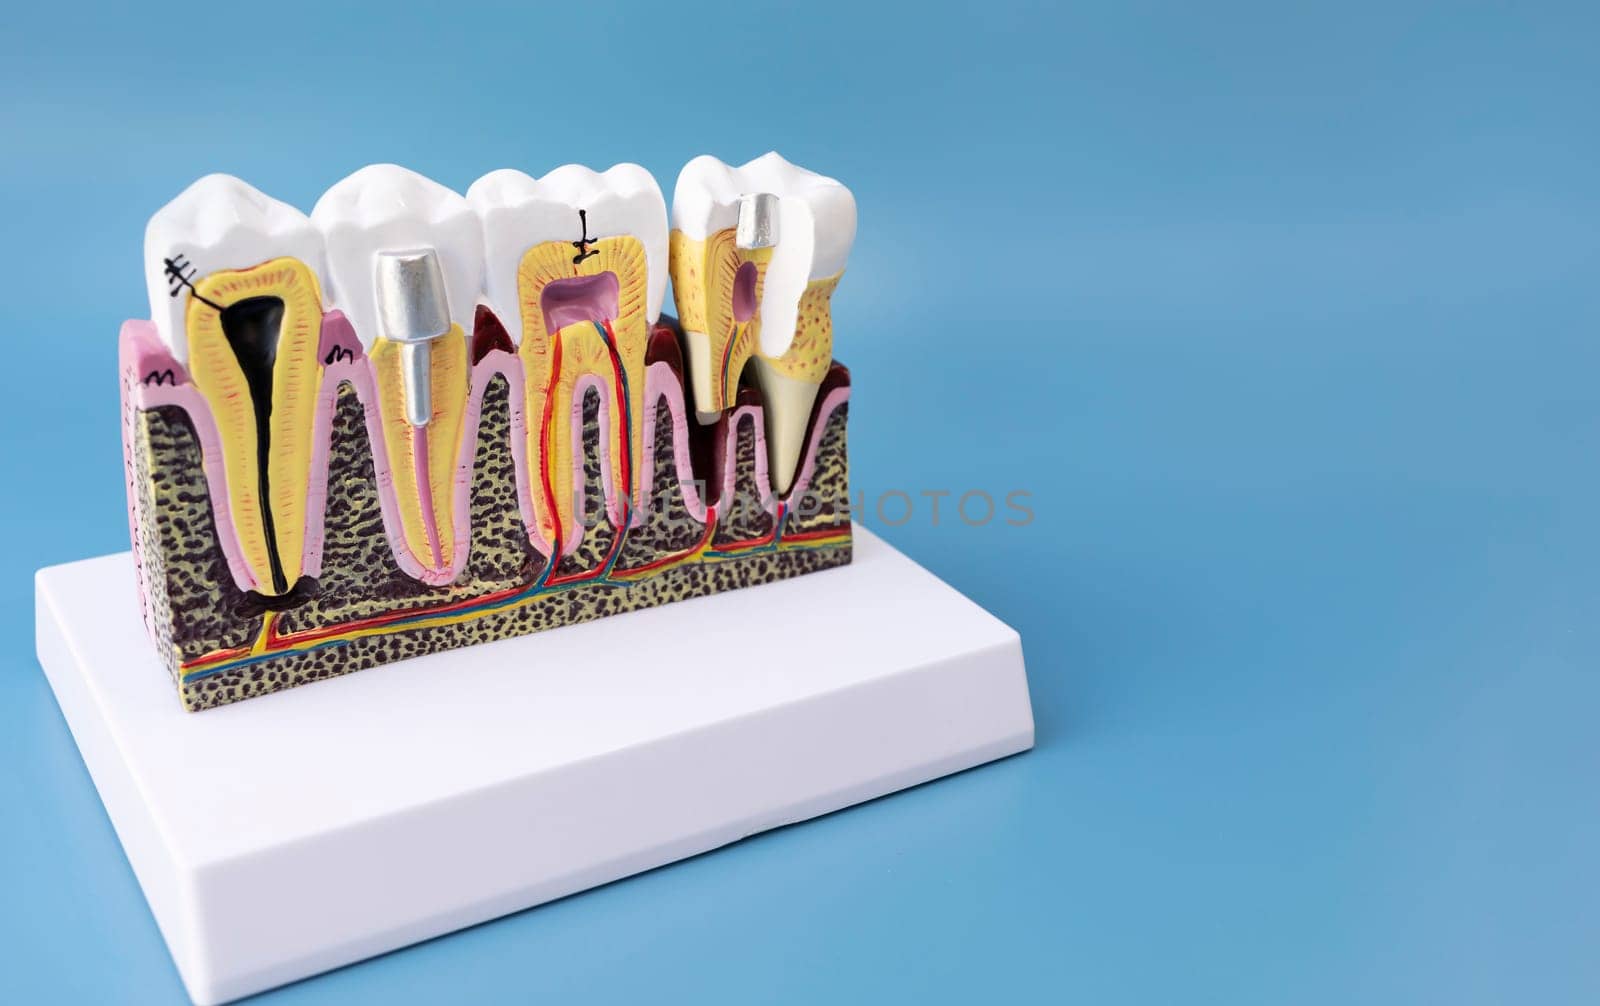 Dental Tooth Bridge Or Implant Model On Blue Background, Copy Space For Text. Dummy Mockup Human Jaw Oral Dentures. Prosthesis On Metal Peg. Horizontal Plane. High quality photo